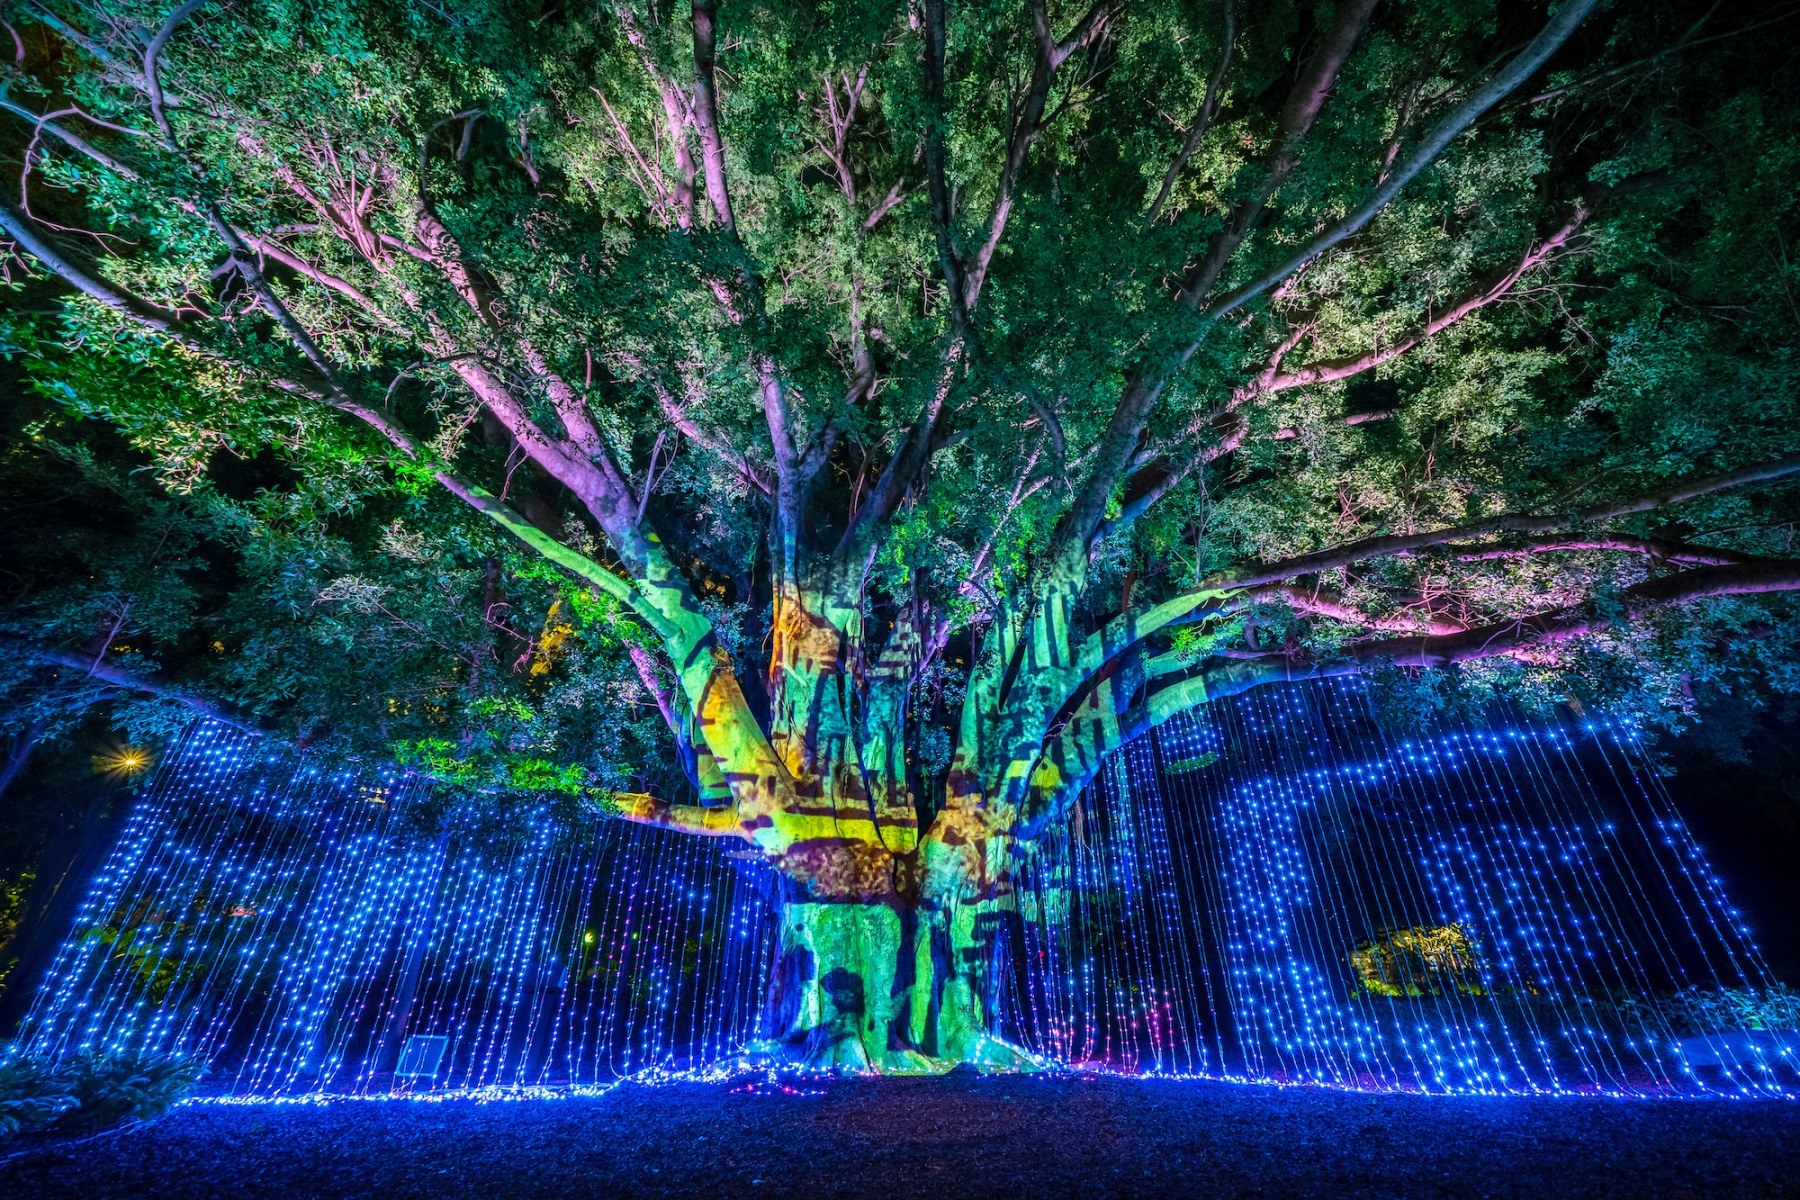 A multitude of blue lights dangle from the branches of a majestic tree like strings of beads, while a projection of abstract patterns moves across the tree’s thick trunk